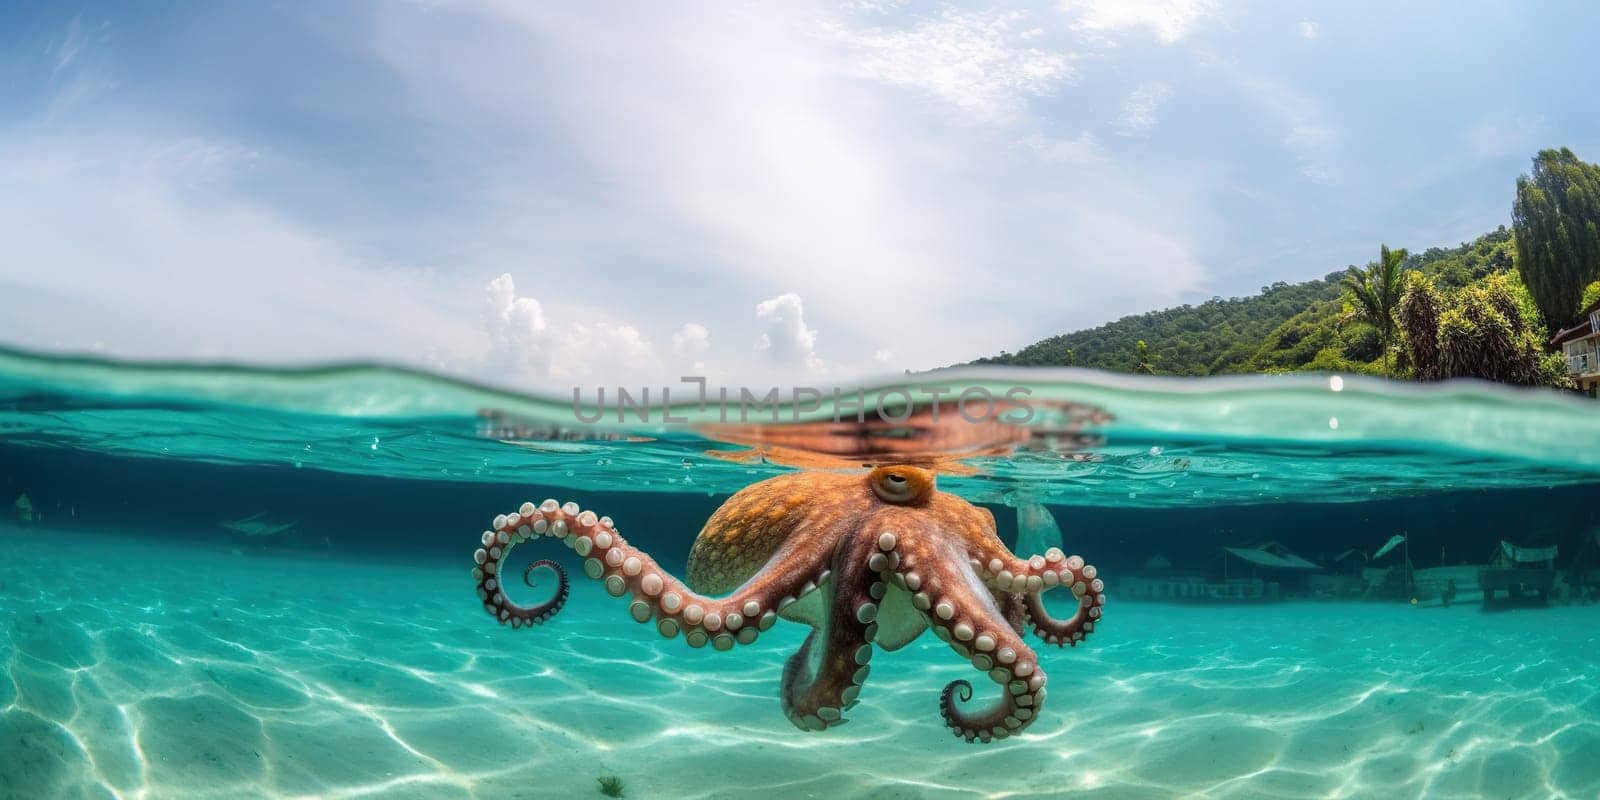 big octopus swims near the surface of water by tan4ikk1